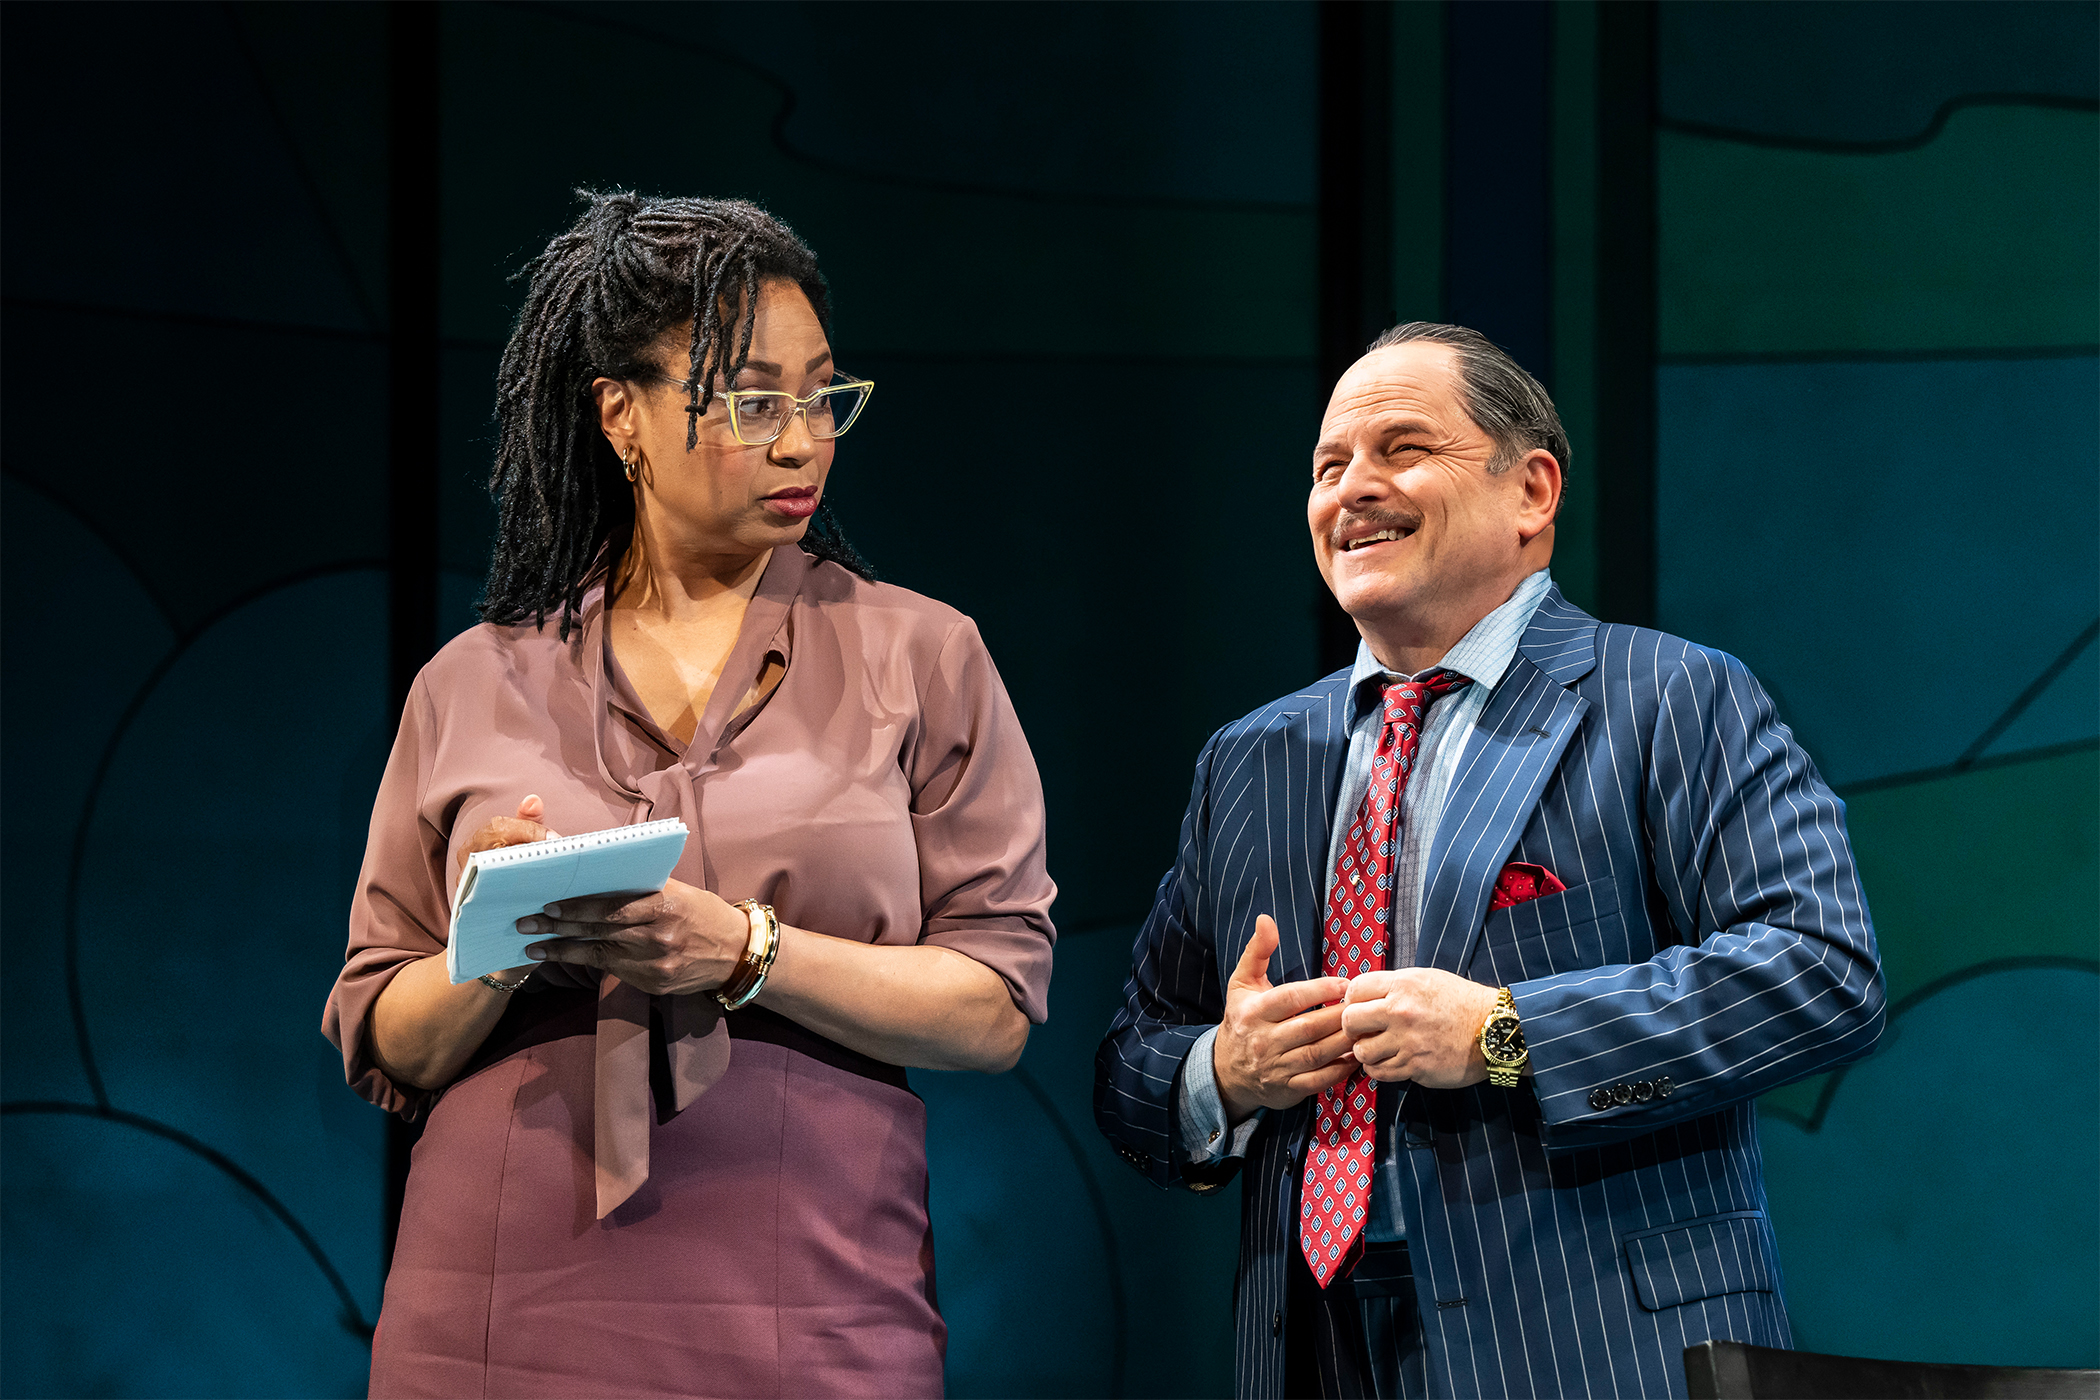 Olivia Denise Dawson and Jason Alexander in "Judgment Day" in...